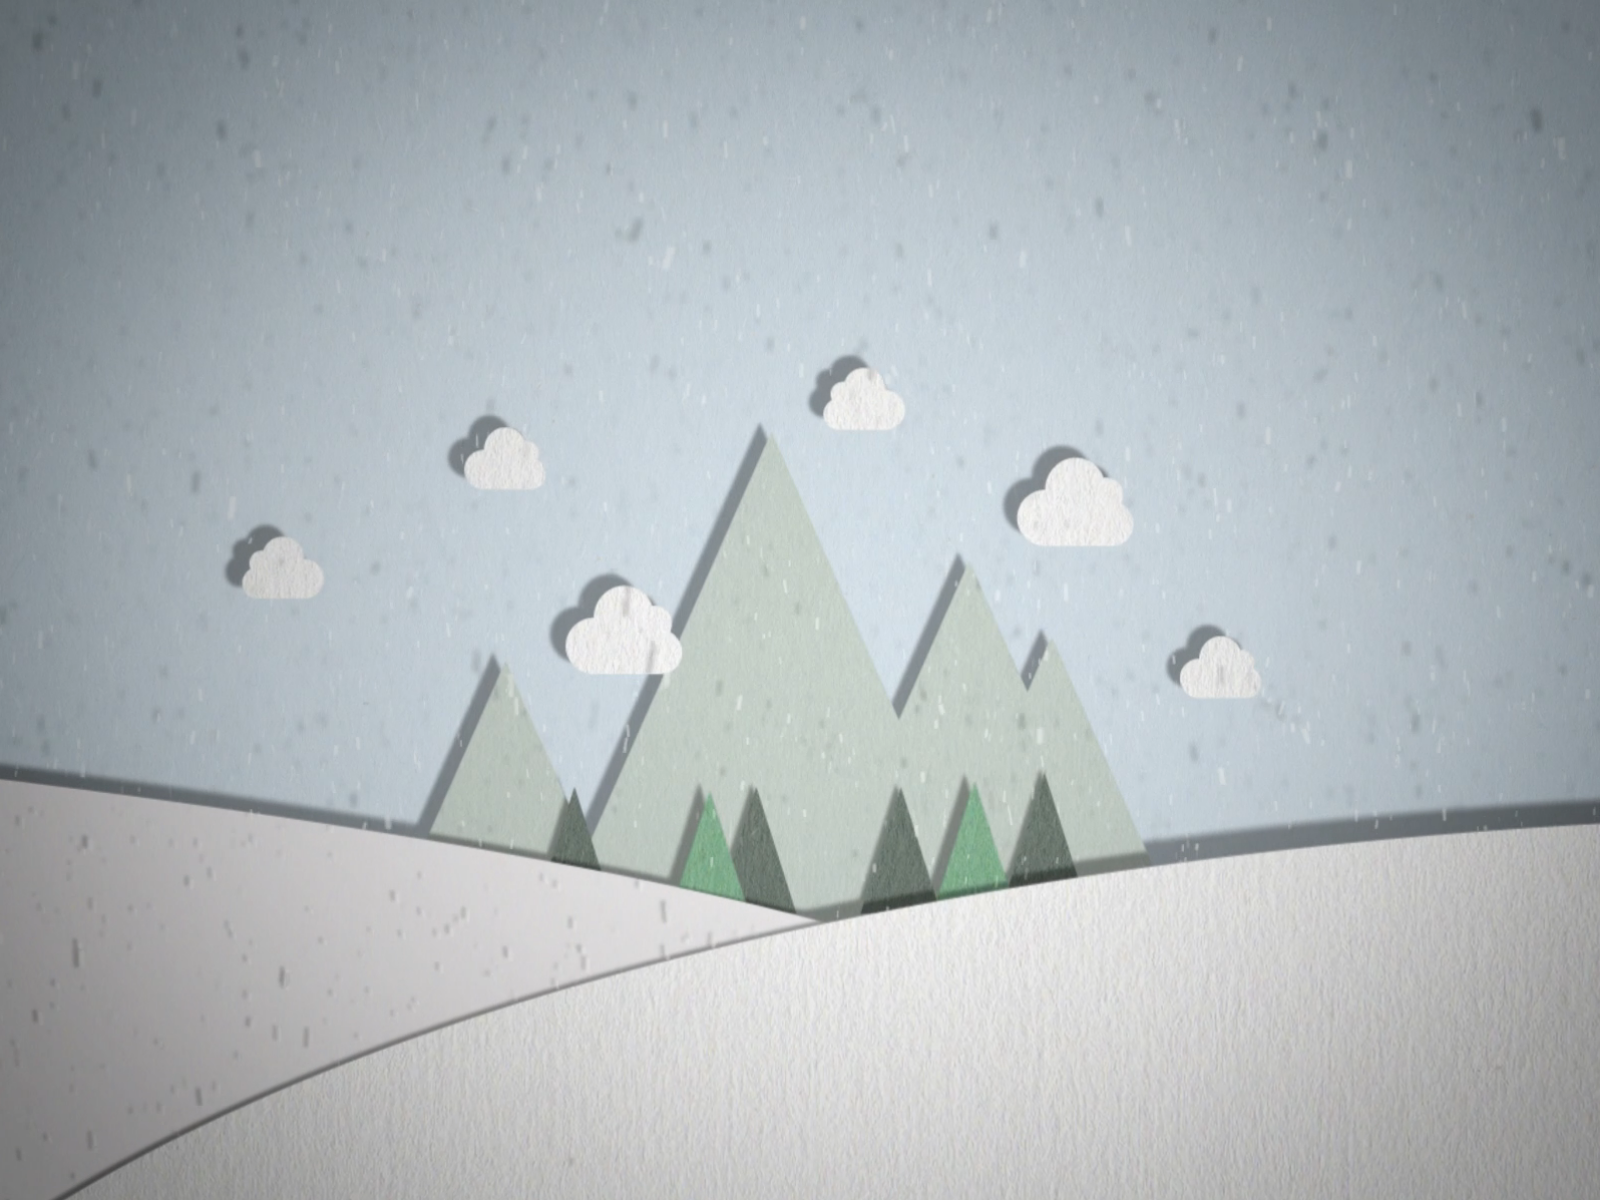 Paper cut out animation by Zoe Dyer on Dribbble